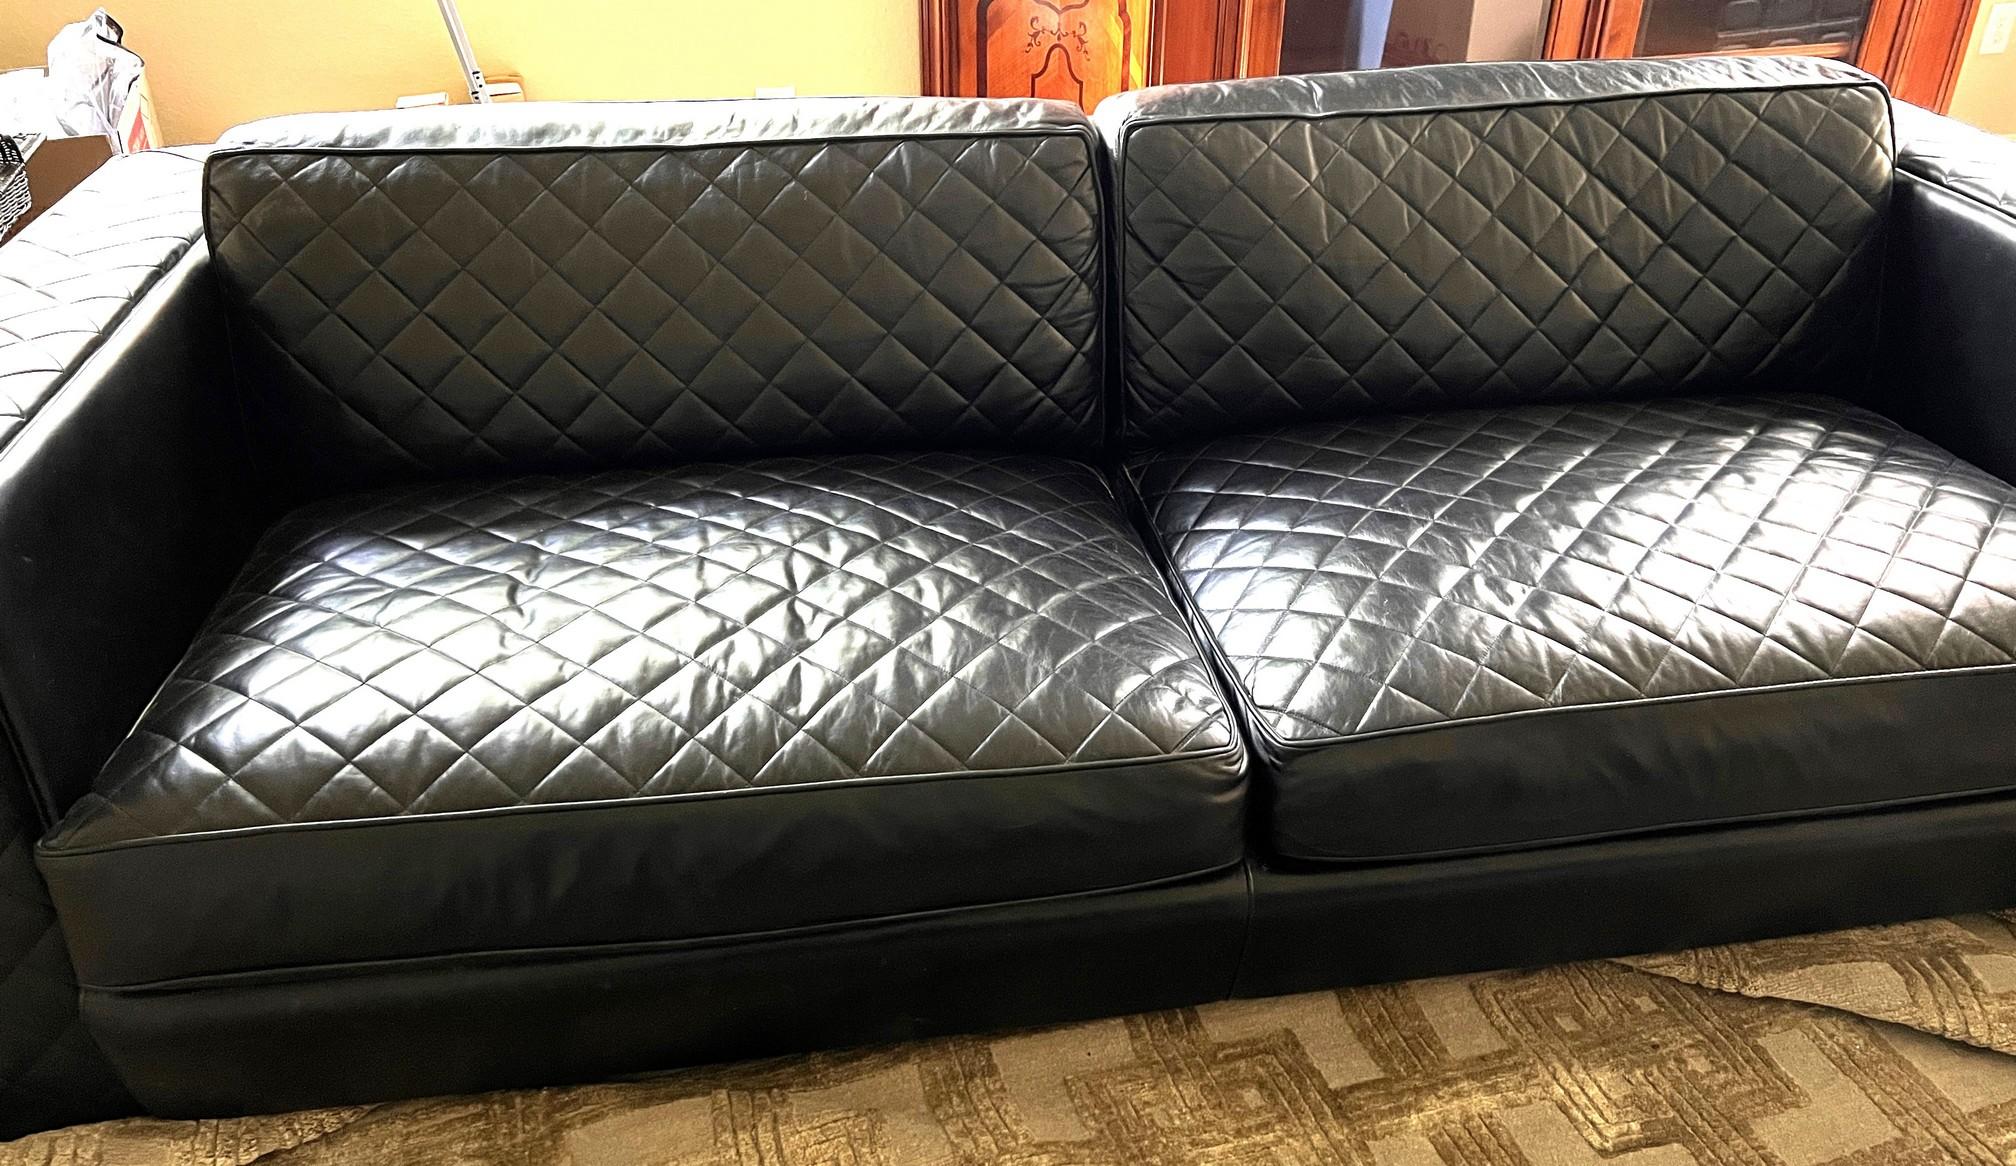 Zamaboni Blaack Leather Quillted Sofa, 96" X 40", Showroom Sample, To Be Picked Up in Davie Made Fro